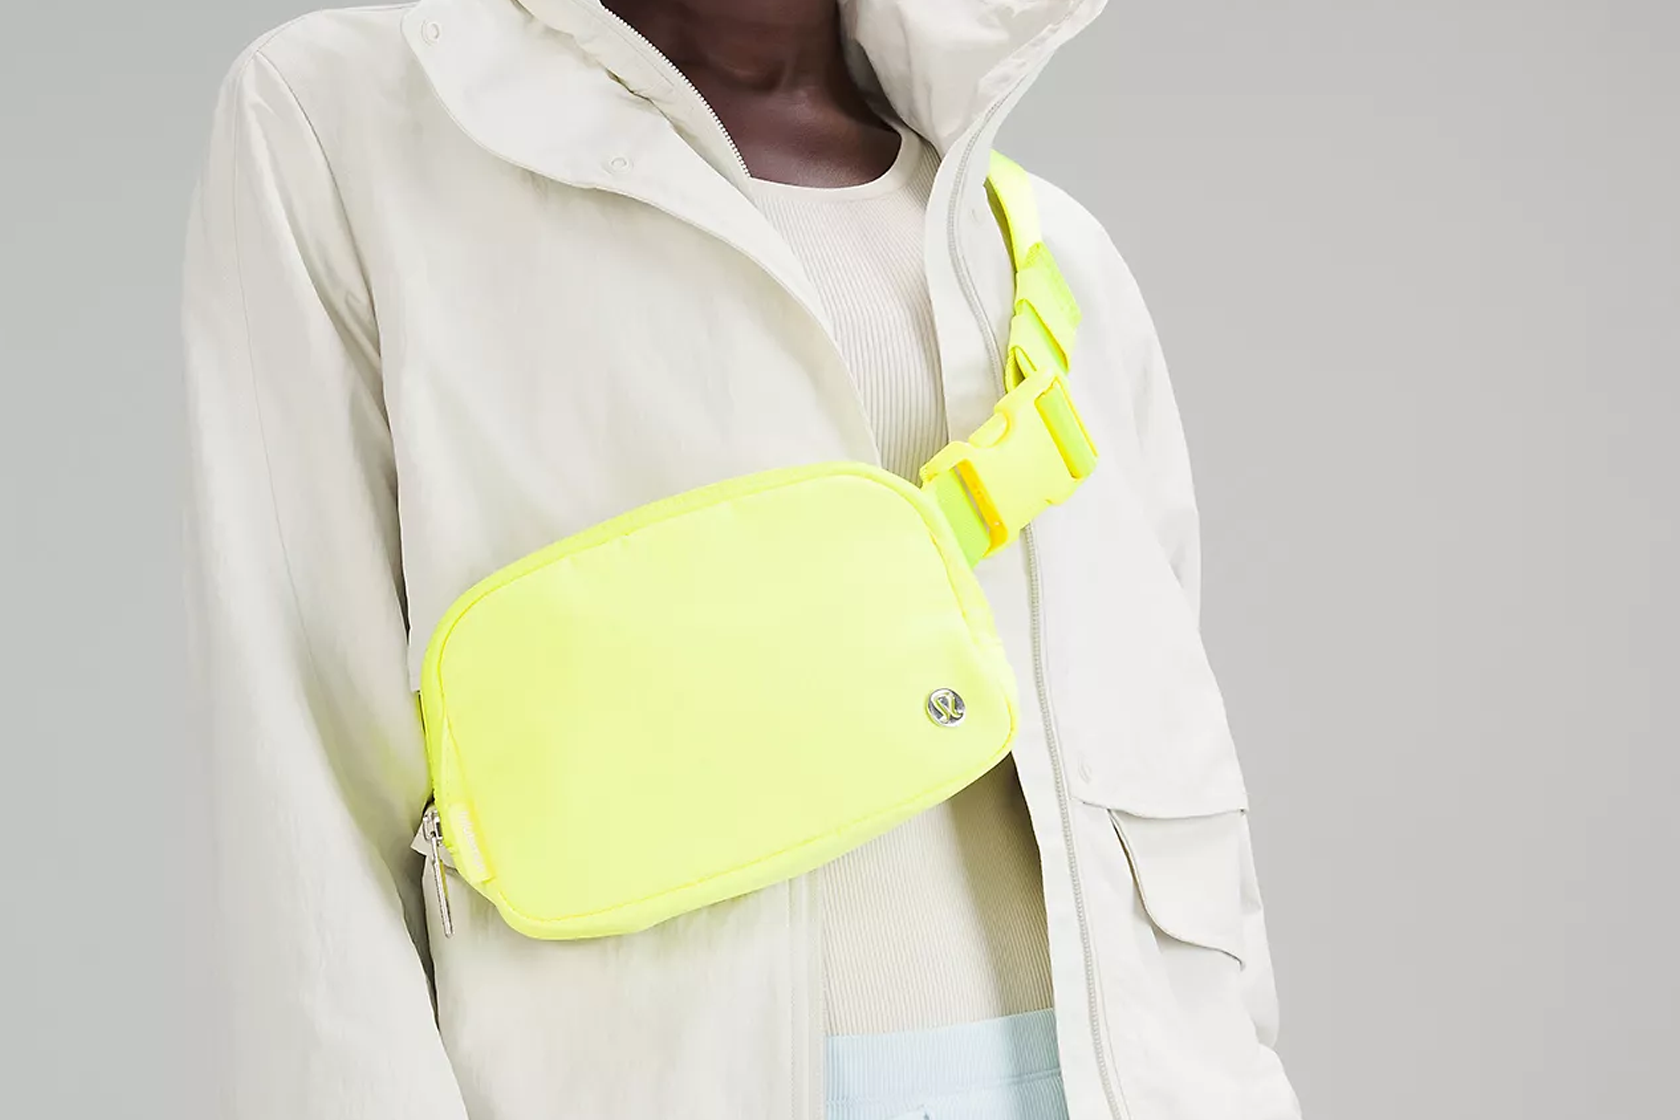 The lululemon Everywhere Belt Bag is restocked with new colors